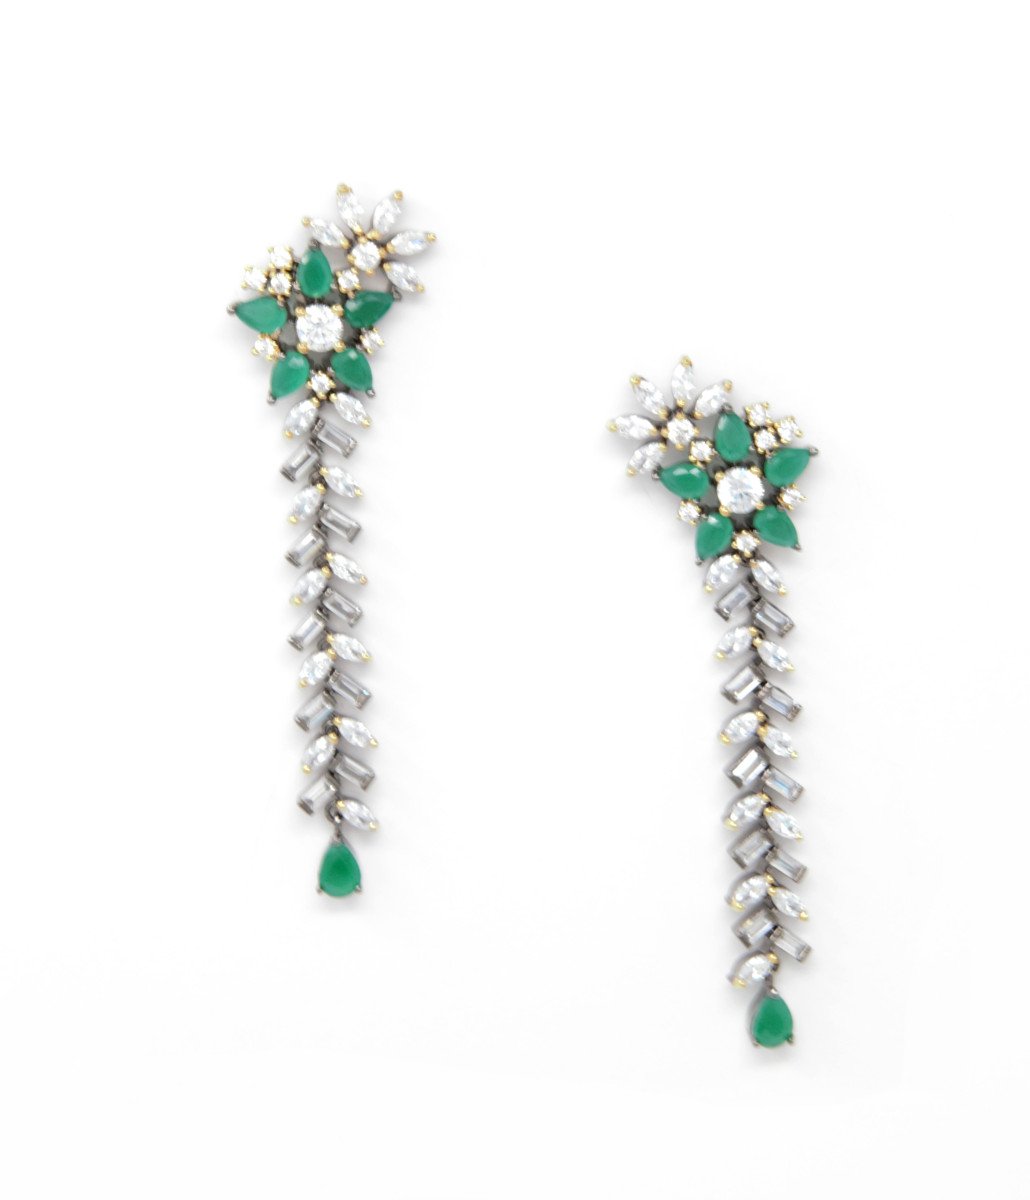 Victorian Style Long Earrings with Green and White Embedded Stones